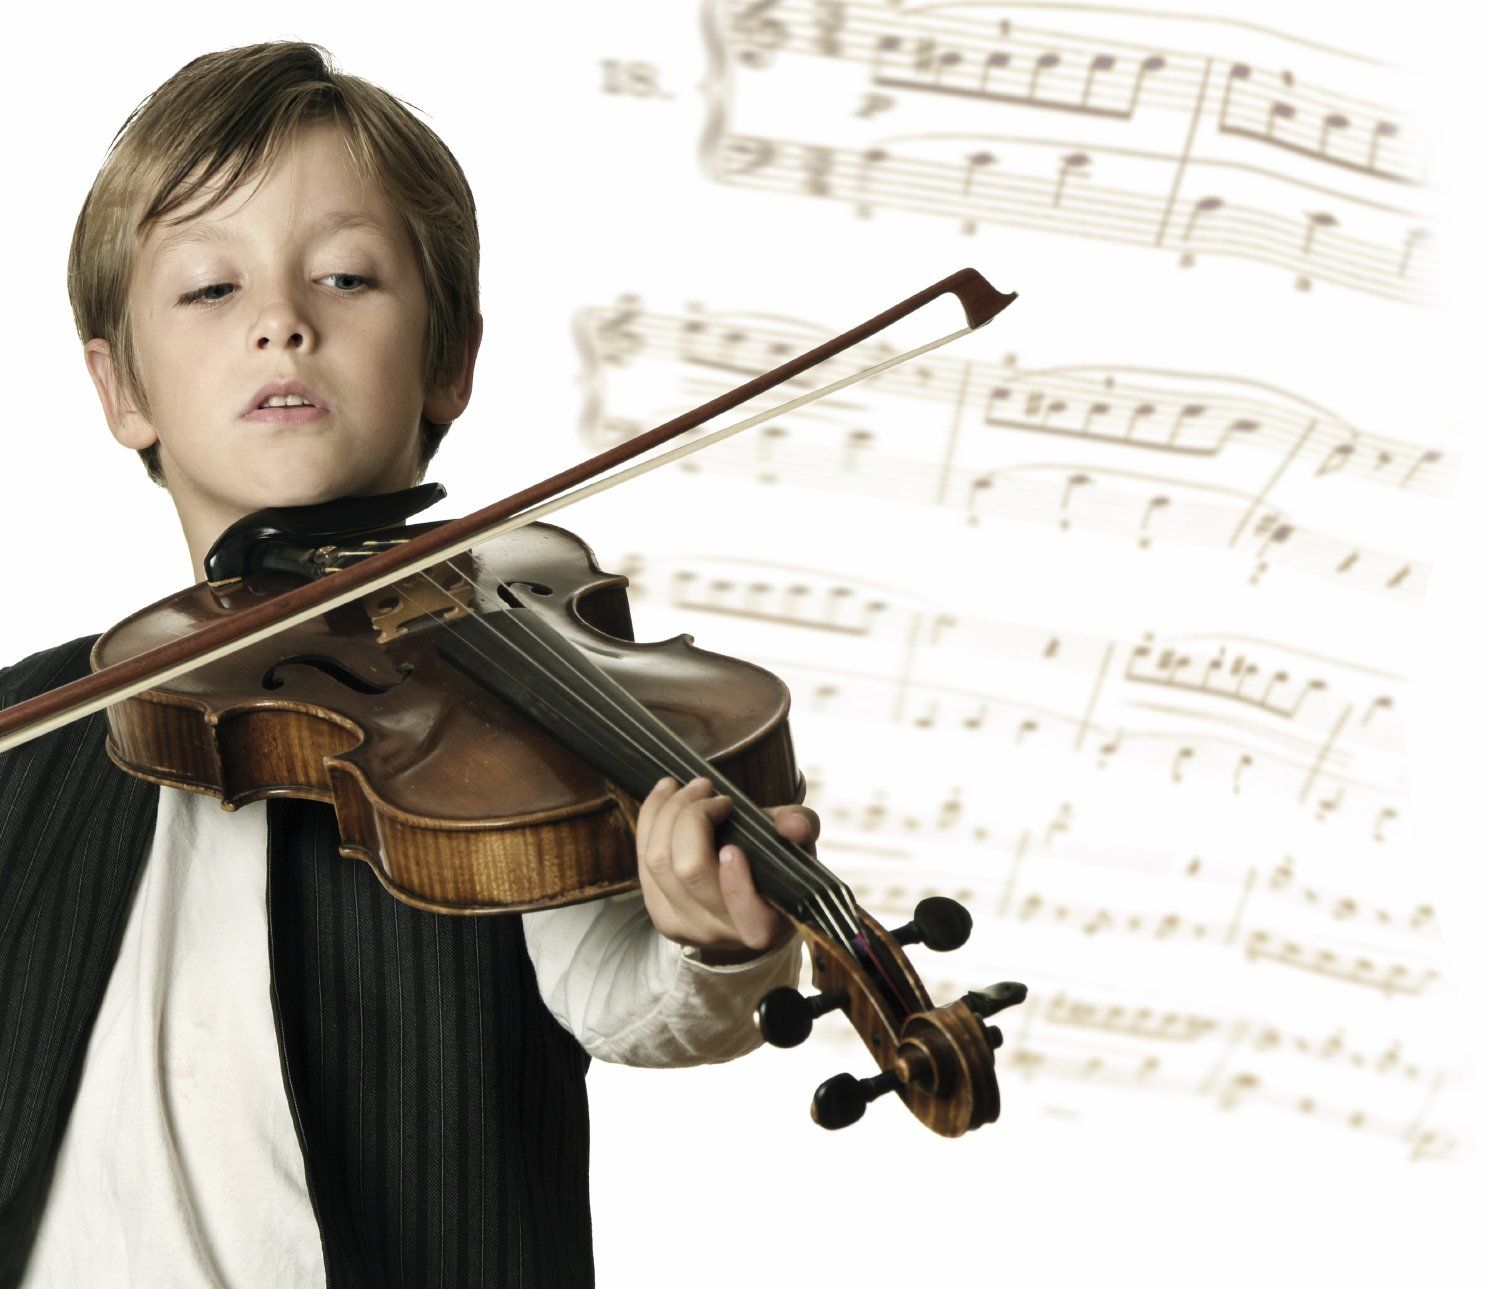 Young boy playing a violin; with music sheets in the background.